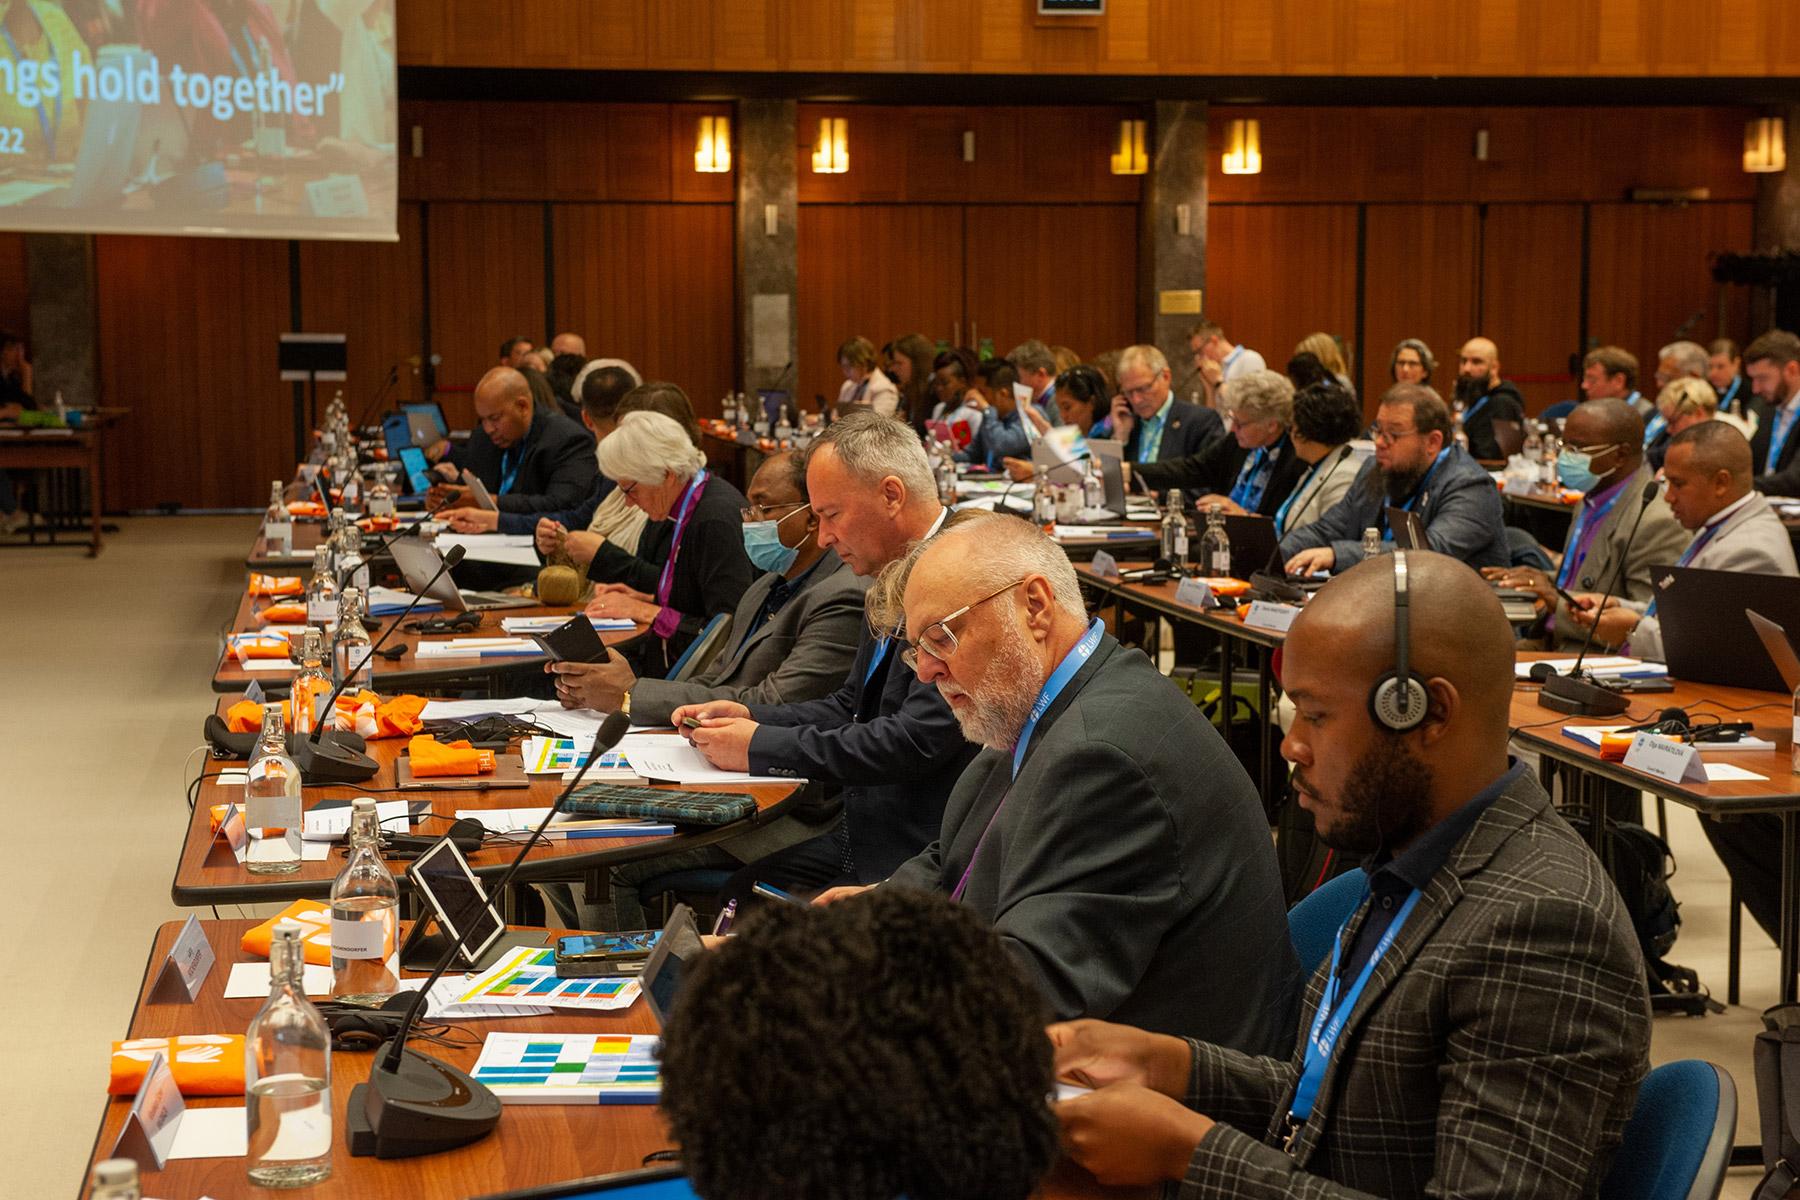 LWF Council members in plenary session 